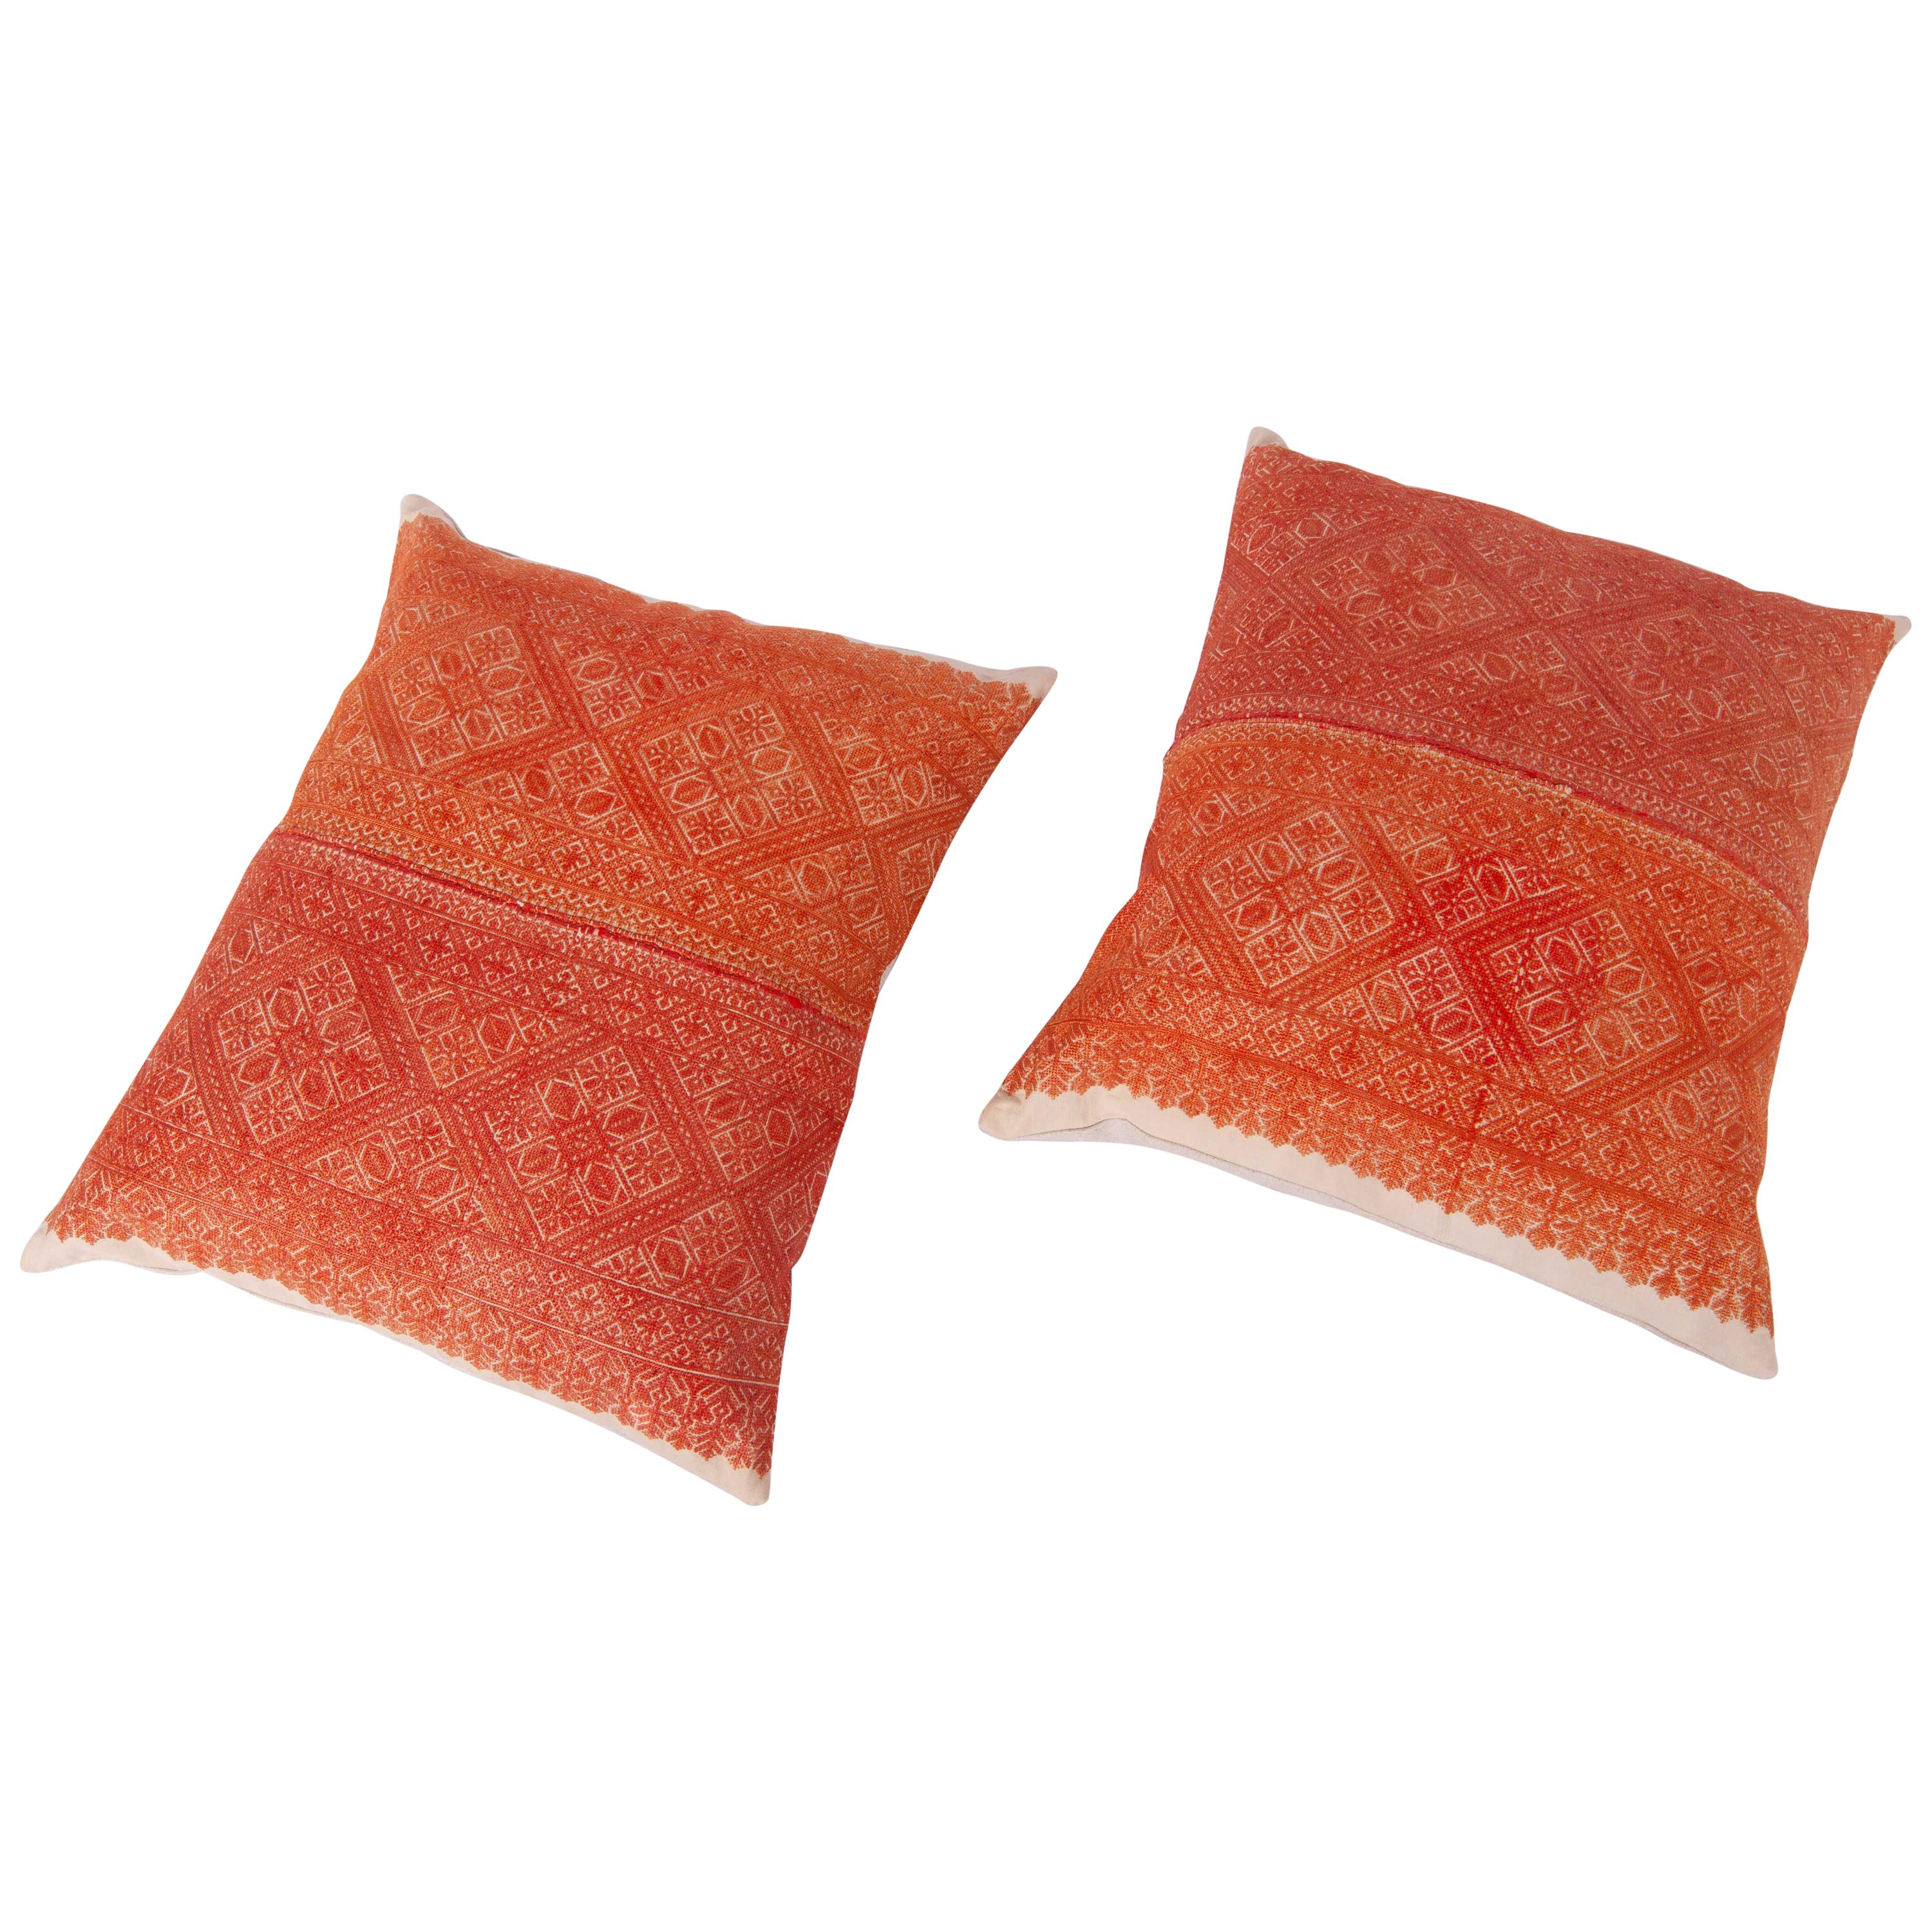 Pillow Cases Made from an Early 20th Century Fez Embroidery from Morocco